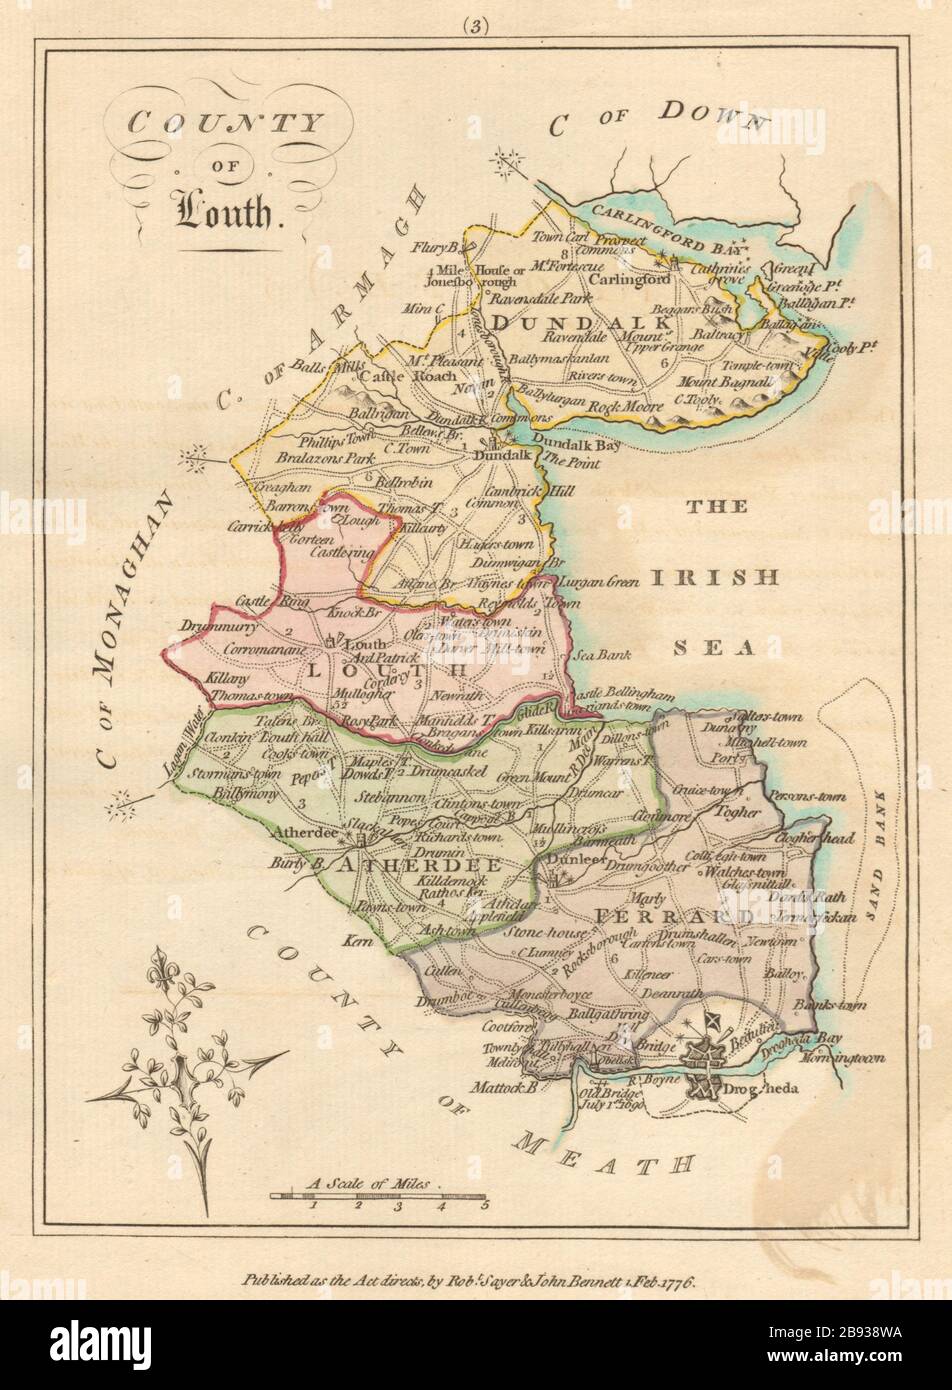 County of Louth, Leinster. Antique copperplate map by Scalé / Sayer 1776 Stock Photo